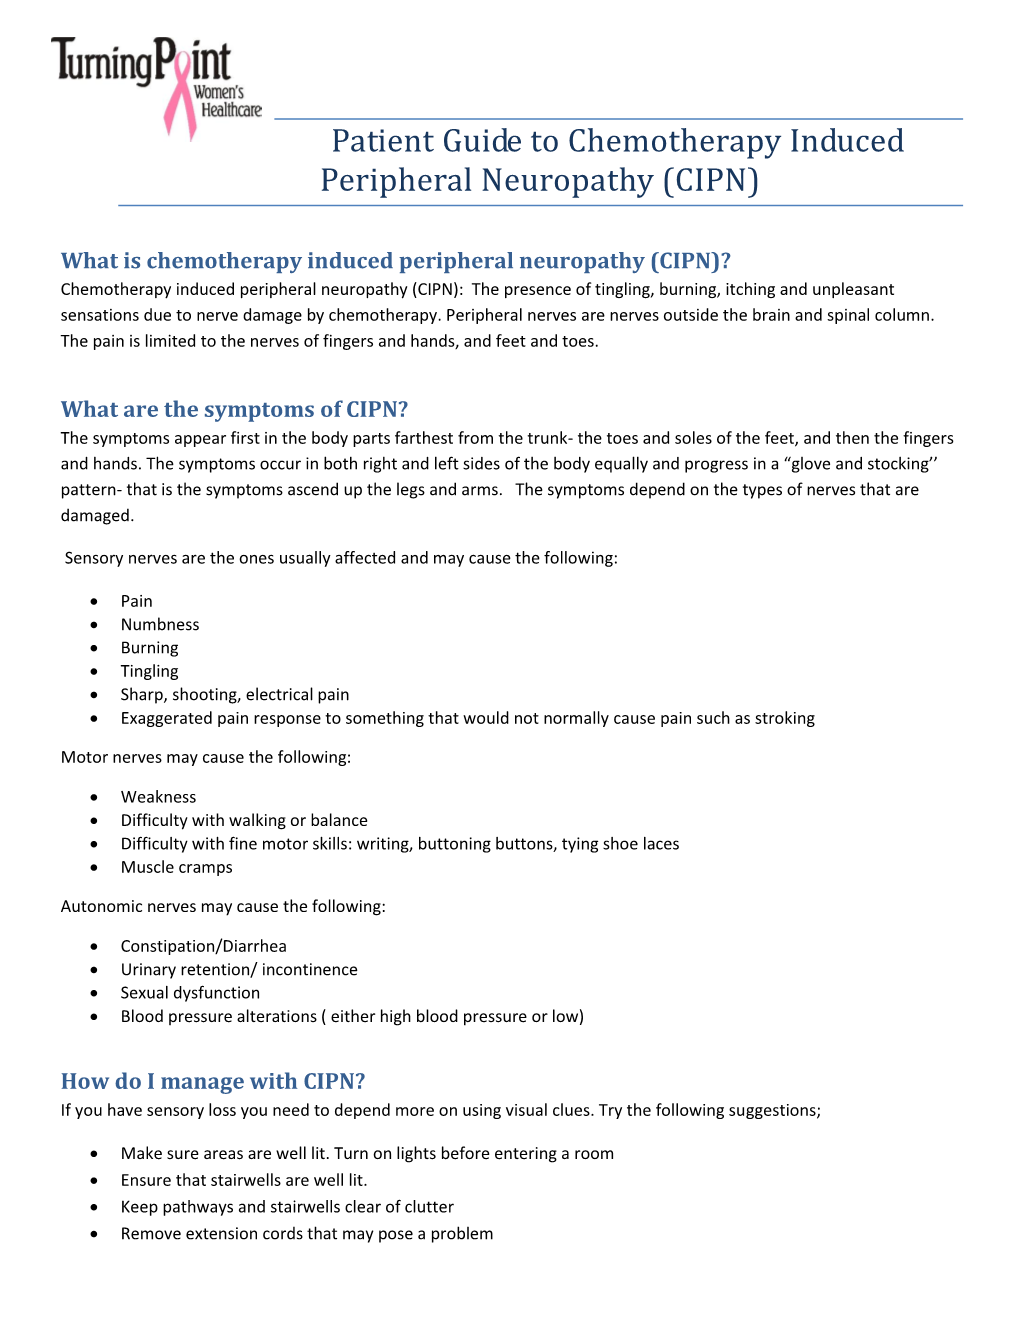 Patient Guide to Chemotherapy Induced Peripheral Neuropathy (CIPN)